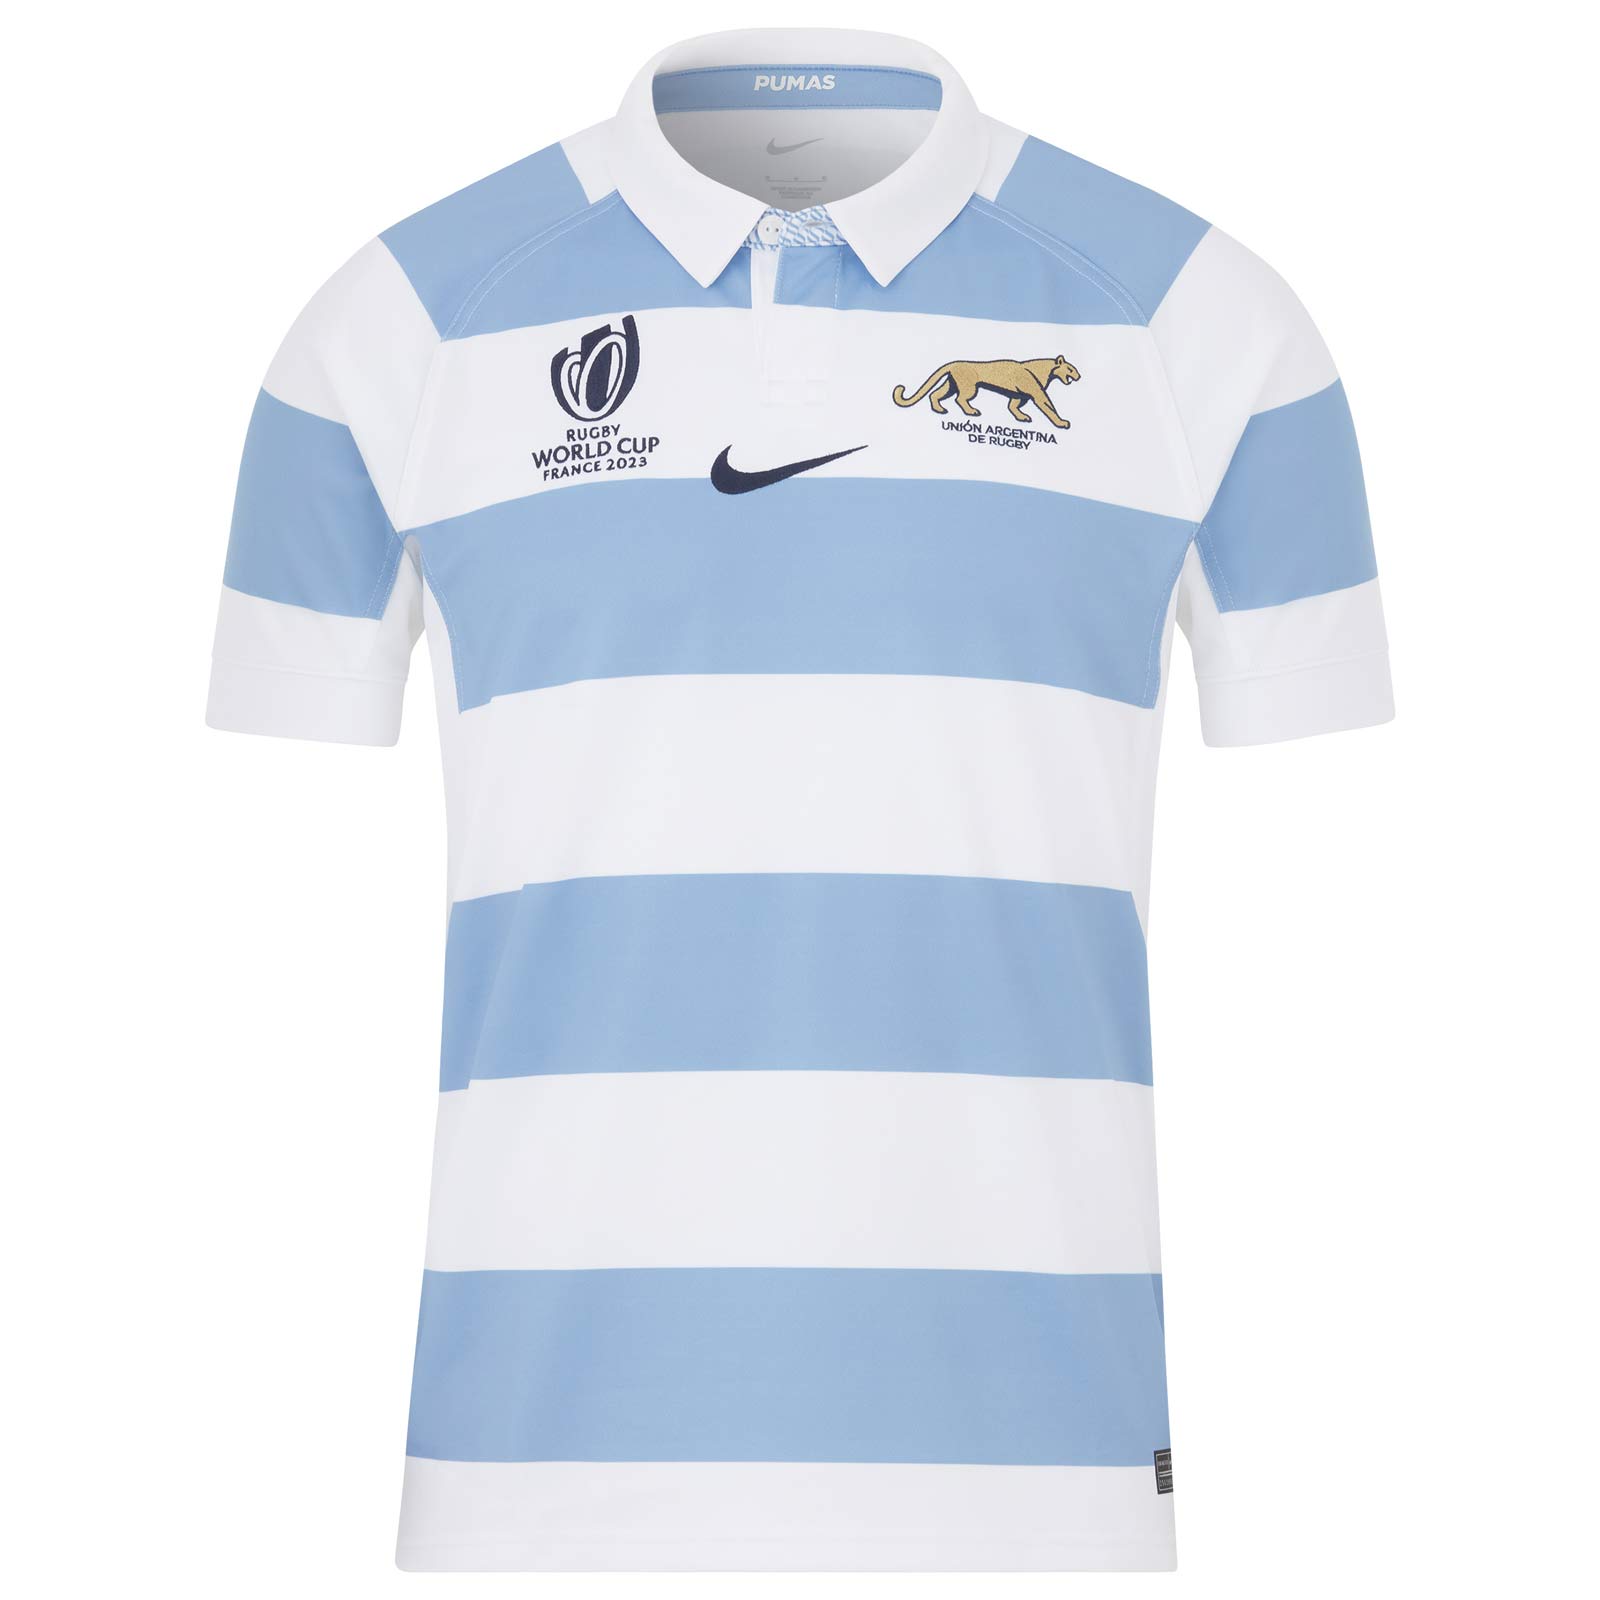 Springboks Rugby World Cup 2023 Replica Home Jersey by Nike